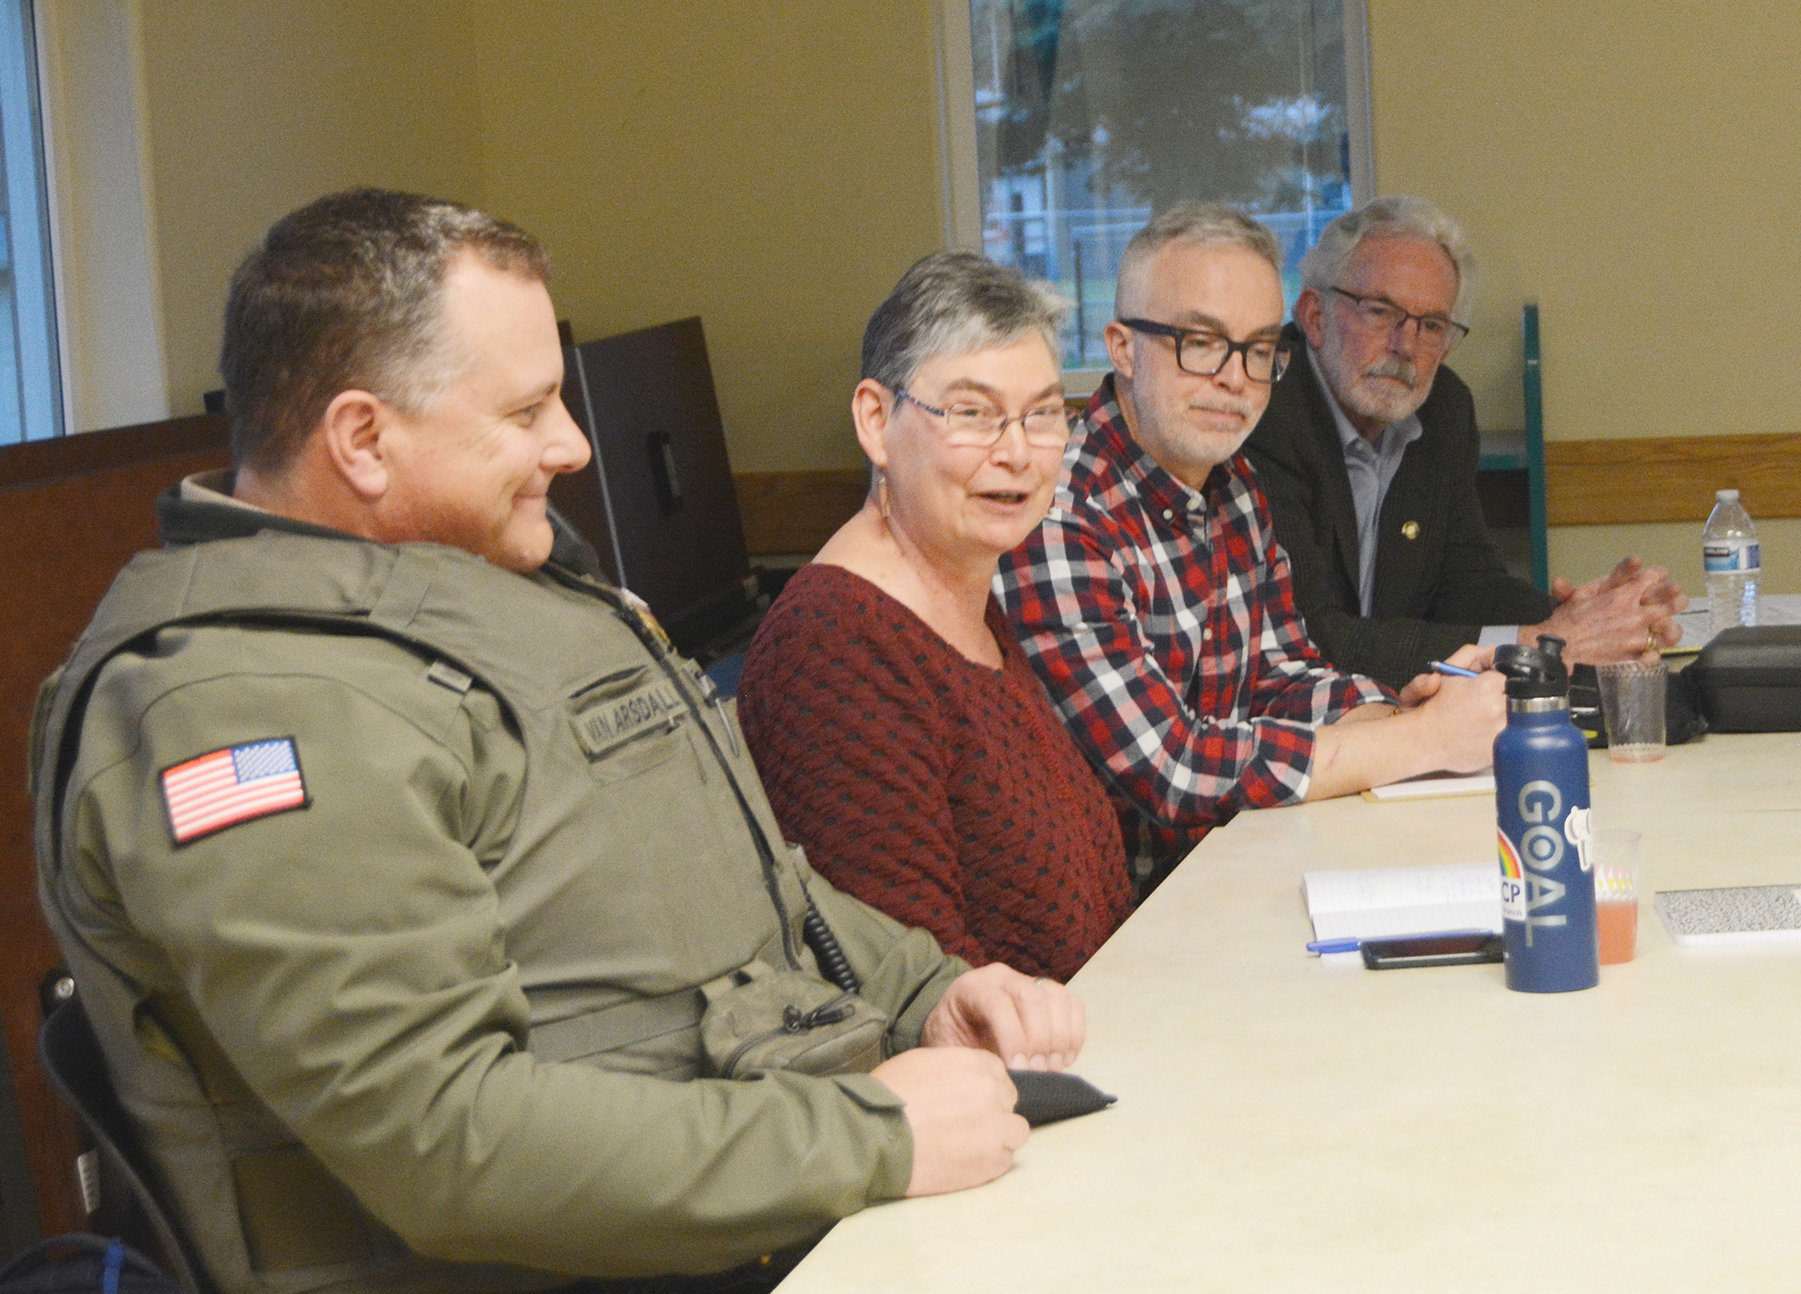 Benton County Sheriff Jef Van Arsdall, Benton County Commissioner Xan Augerot, Lincoln County Commissioner Casey Miller, and Senator Dick Anderson meet with residents of Alsea.